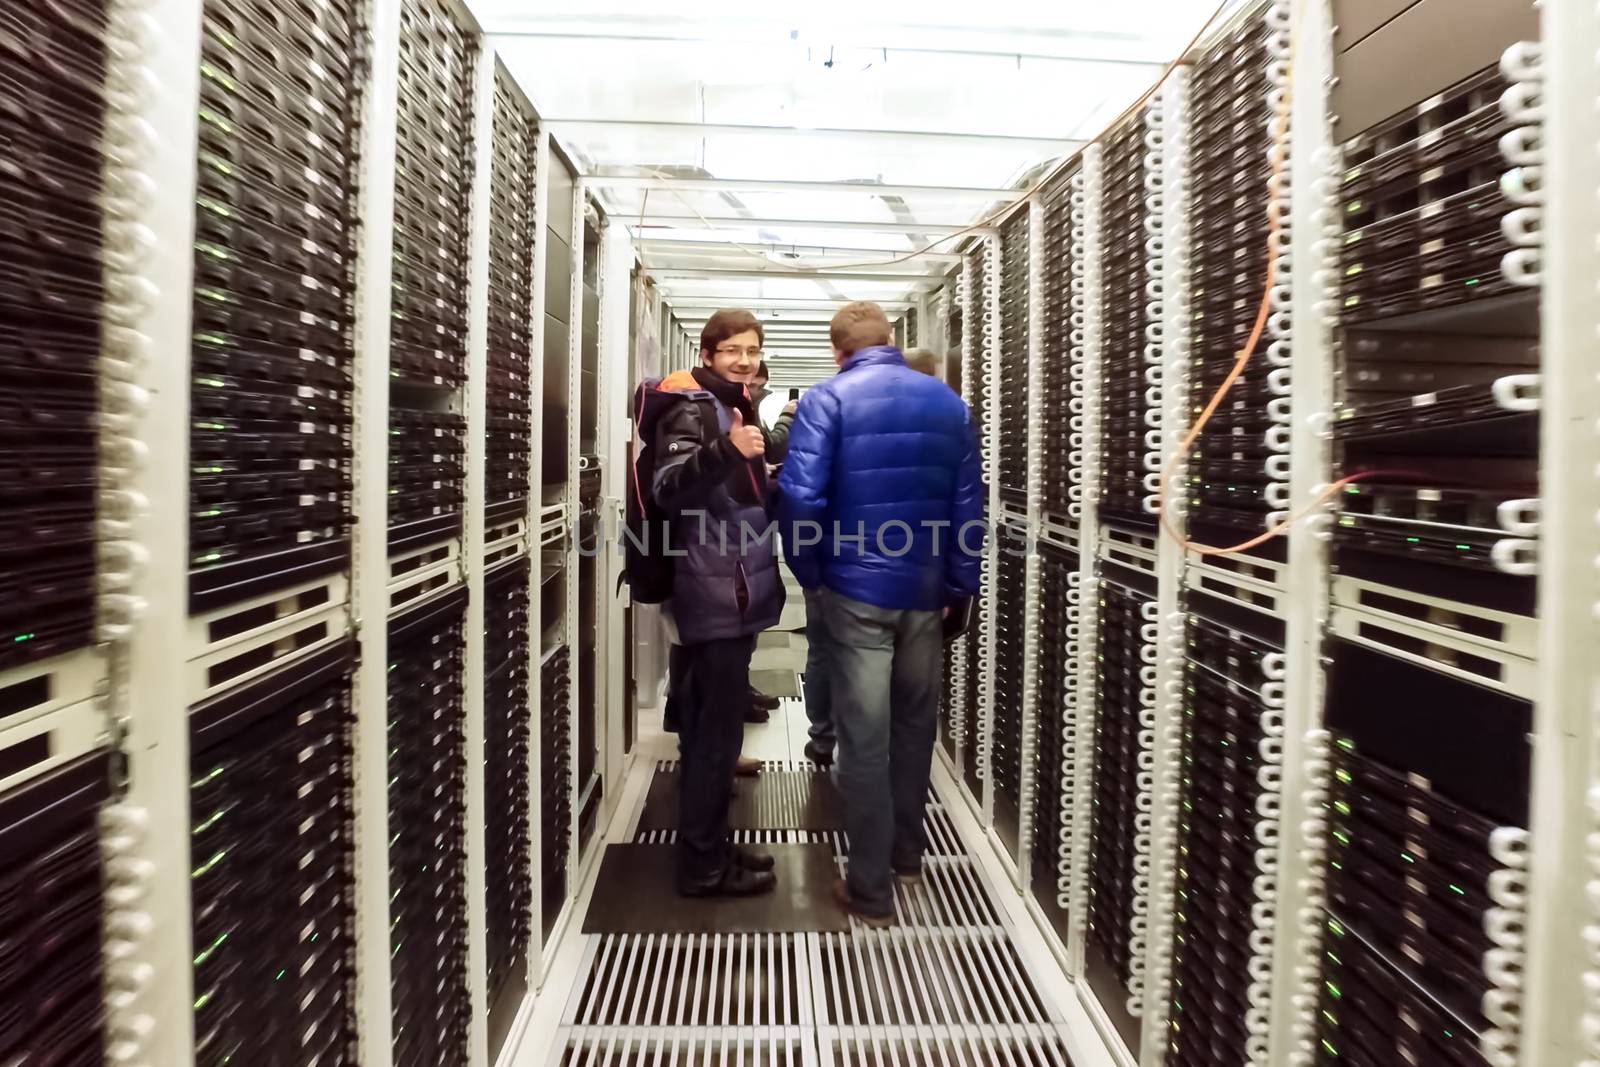 Arkhangelsk, Russia - December 27, 2017: System administrators in the corridor are the data center.